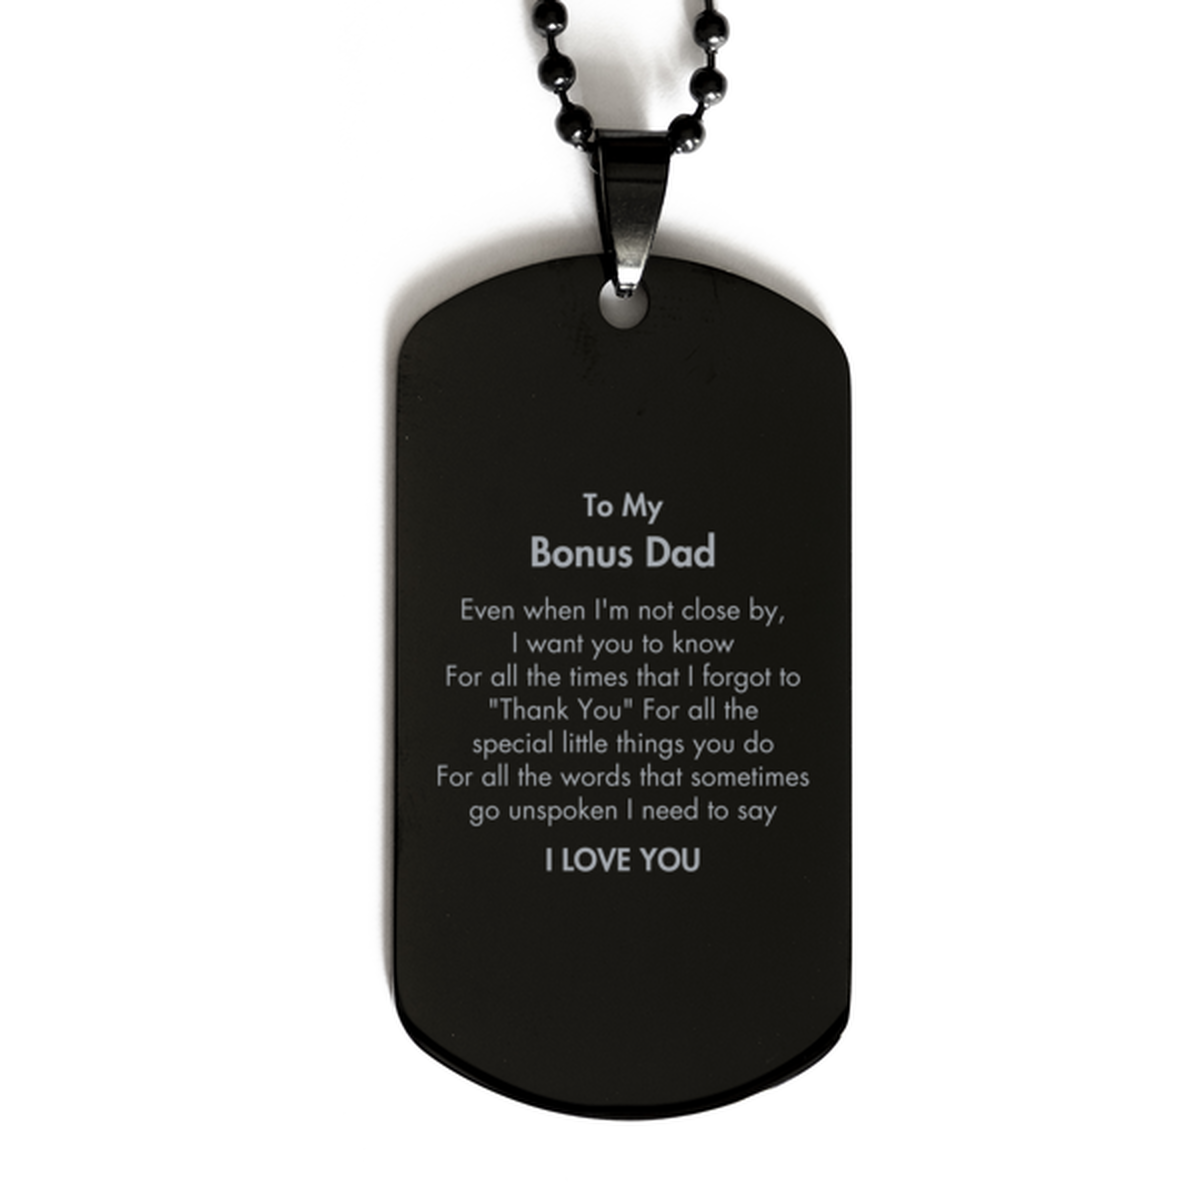 Thank You Gifts for Bonus Dad, Keepsake Black Dog Tag Gifts for Bonus Dad Birthday Mother's day Father's Day Bonus Dad For all the words That sometimes go unspoken I need to say I LOVE YOU